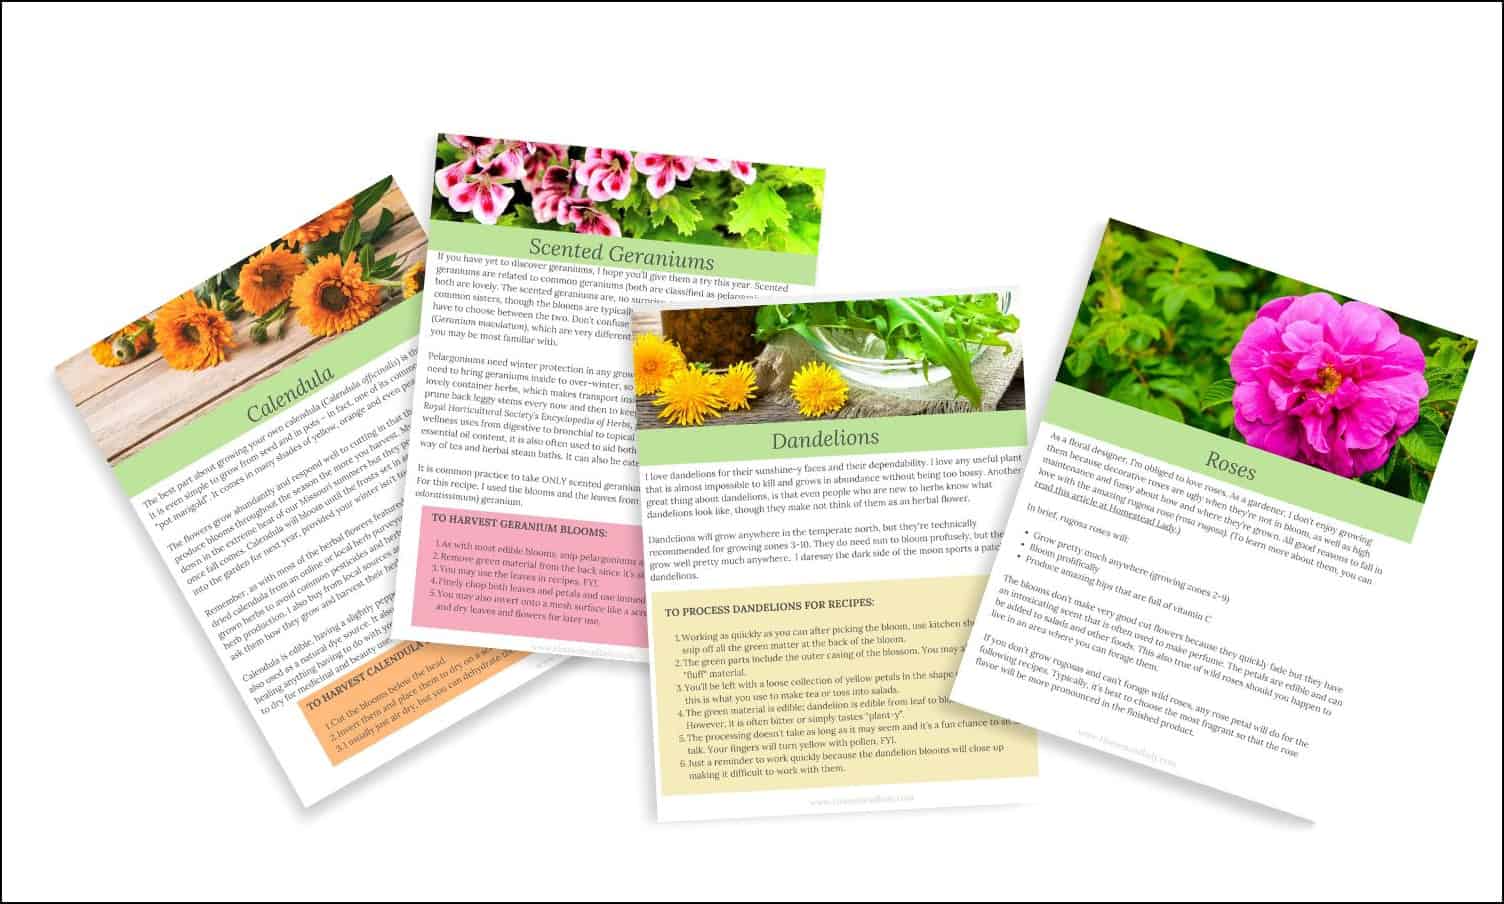 Herbal Flower Recipes sample pages, decorative